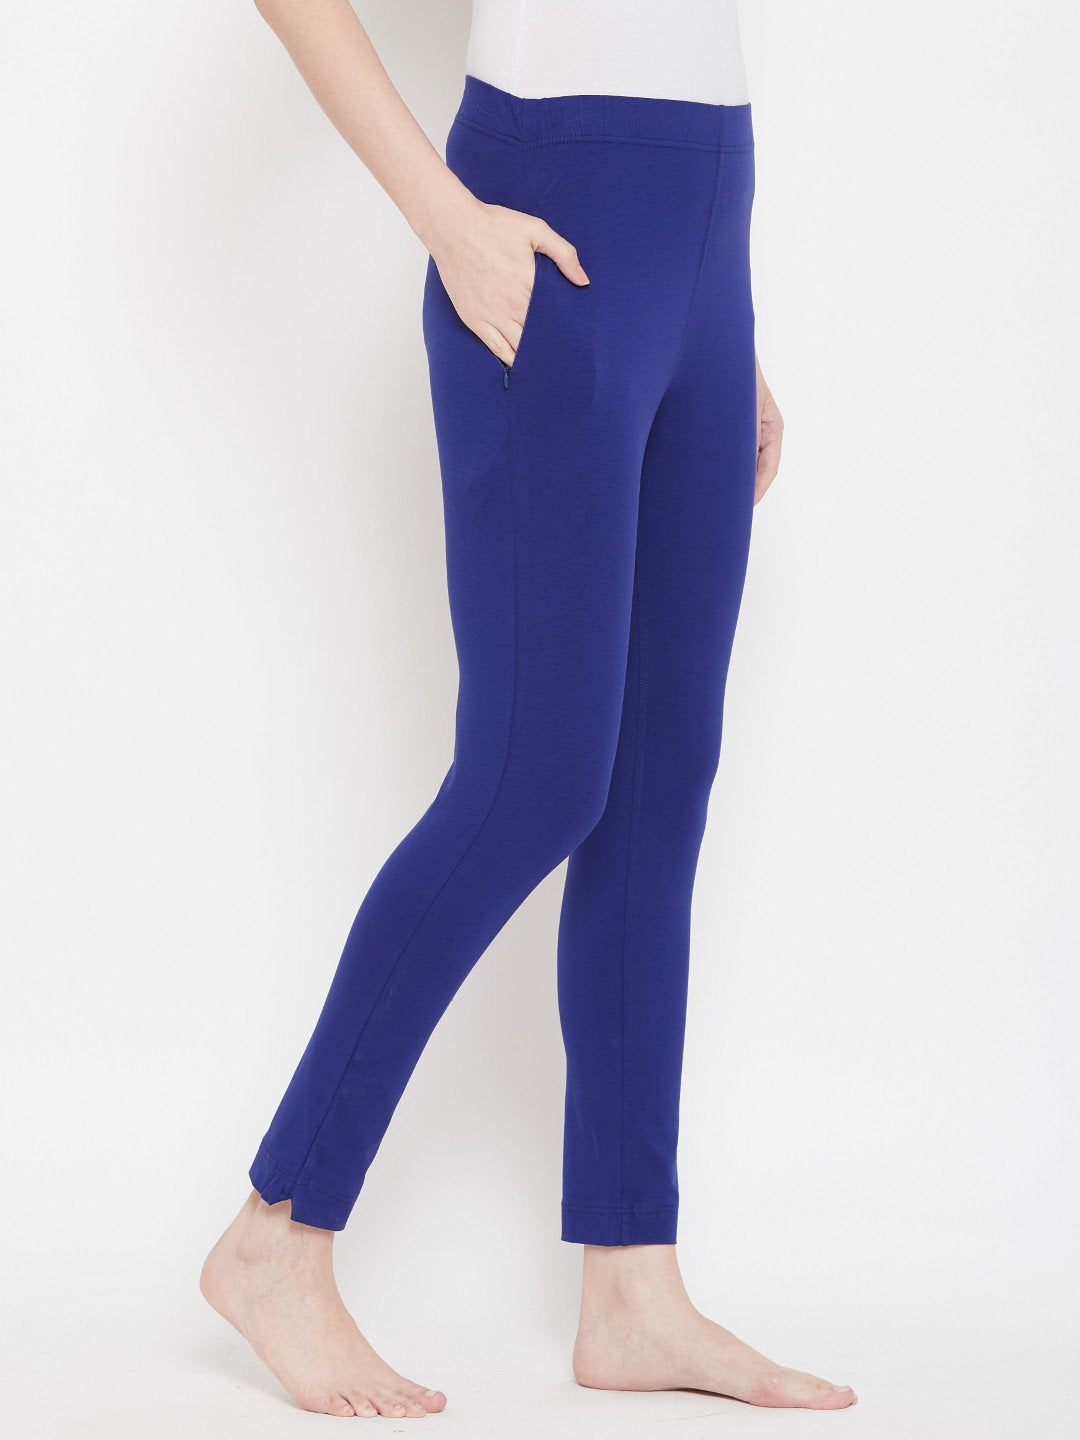 Update more than 141 comfort lady leggings latest